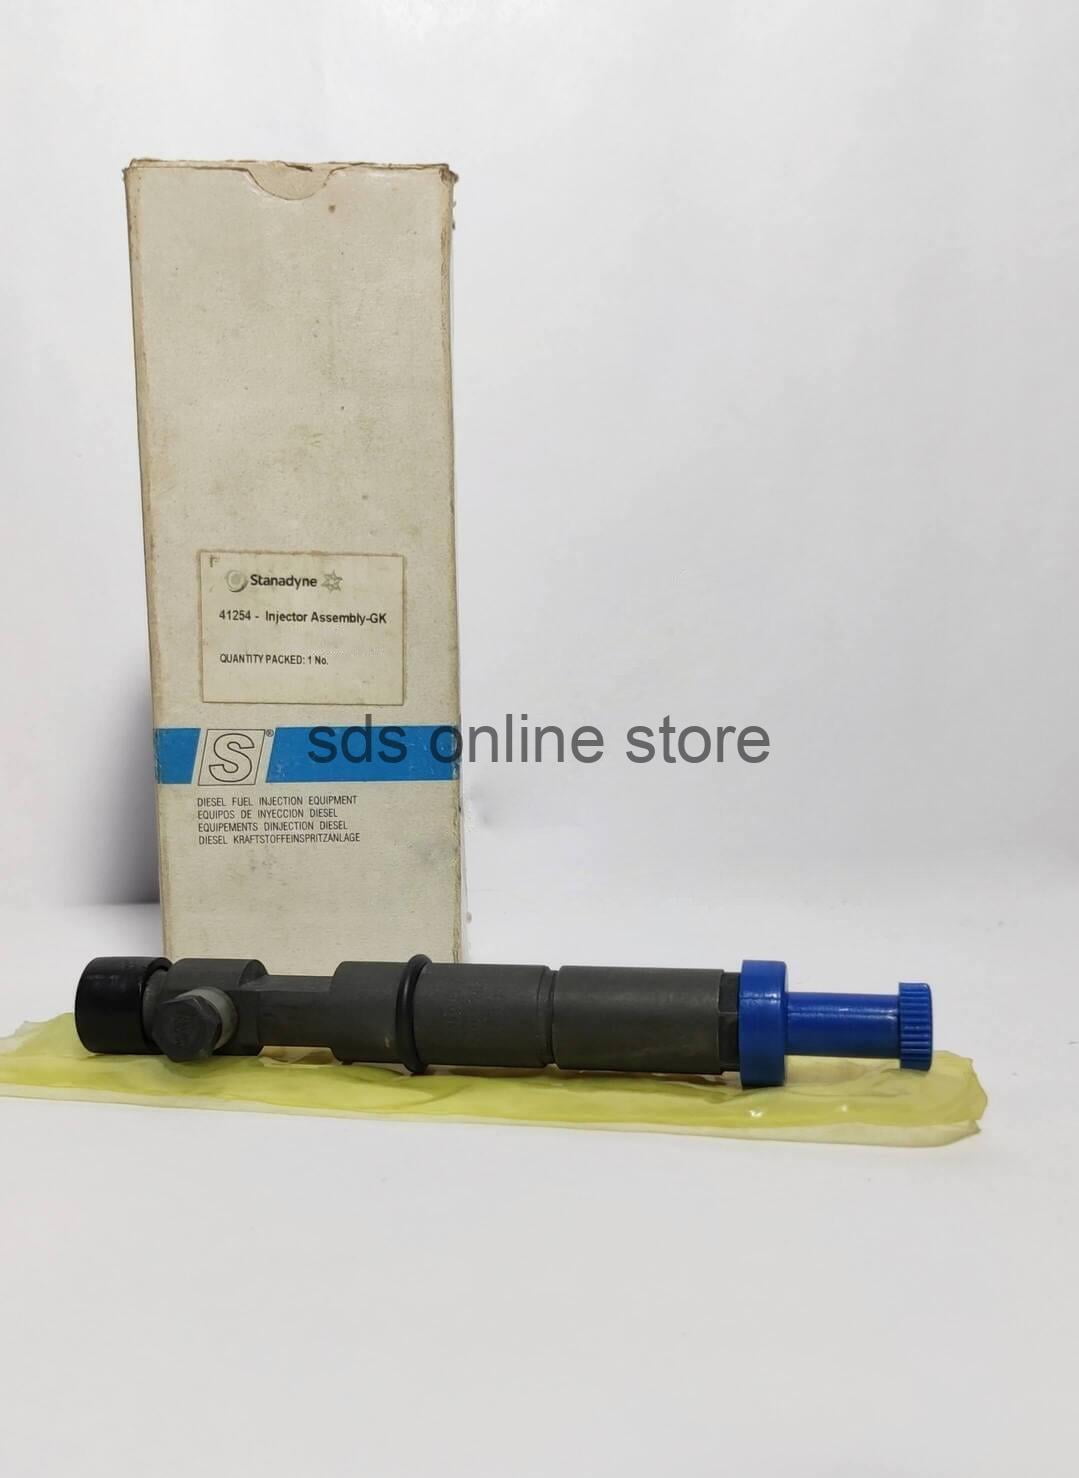 Stanadyne 41254- Injector Assembly-GK